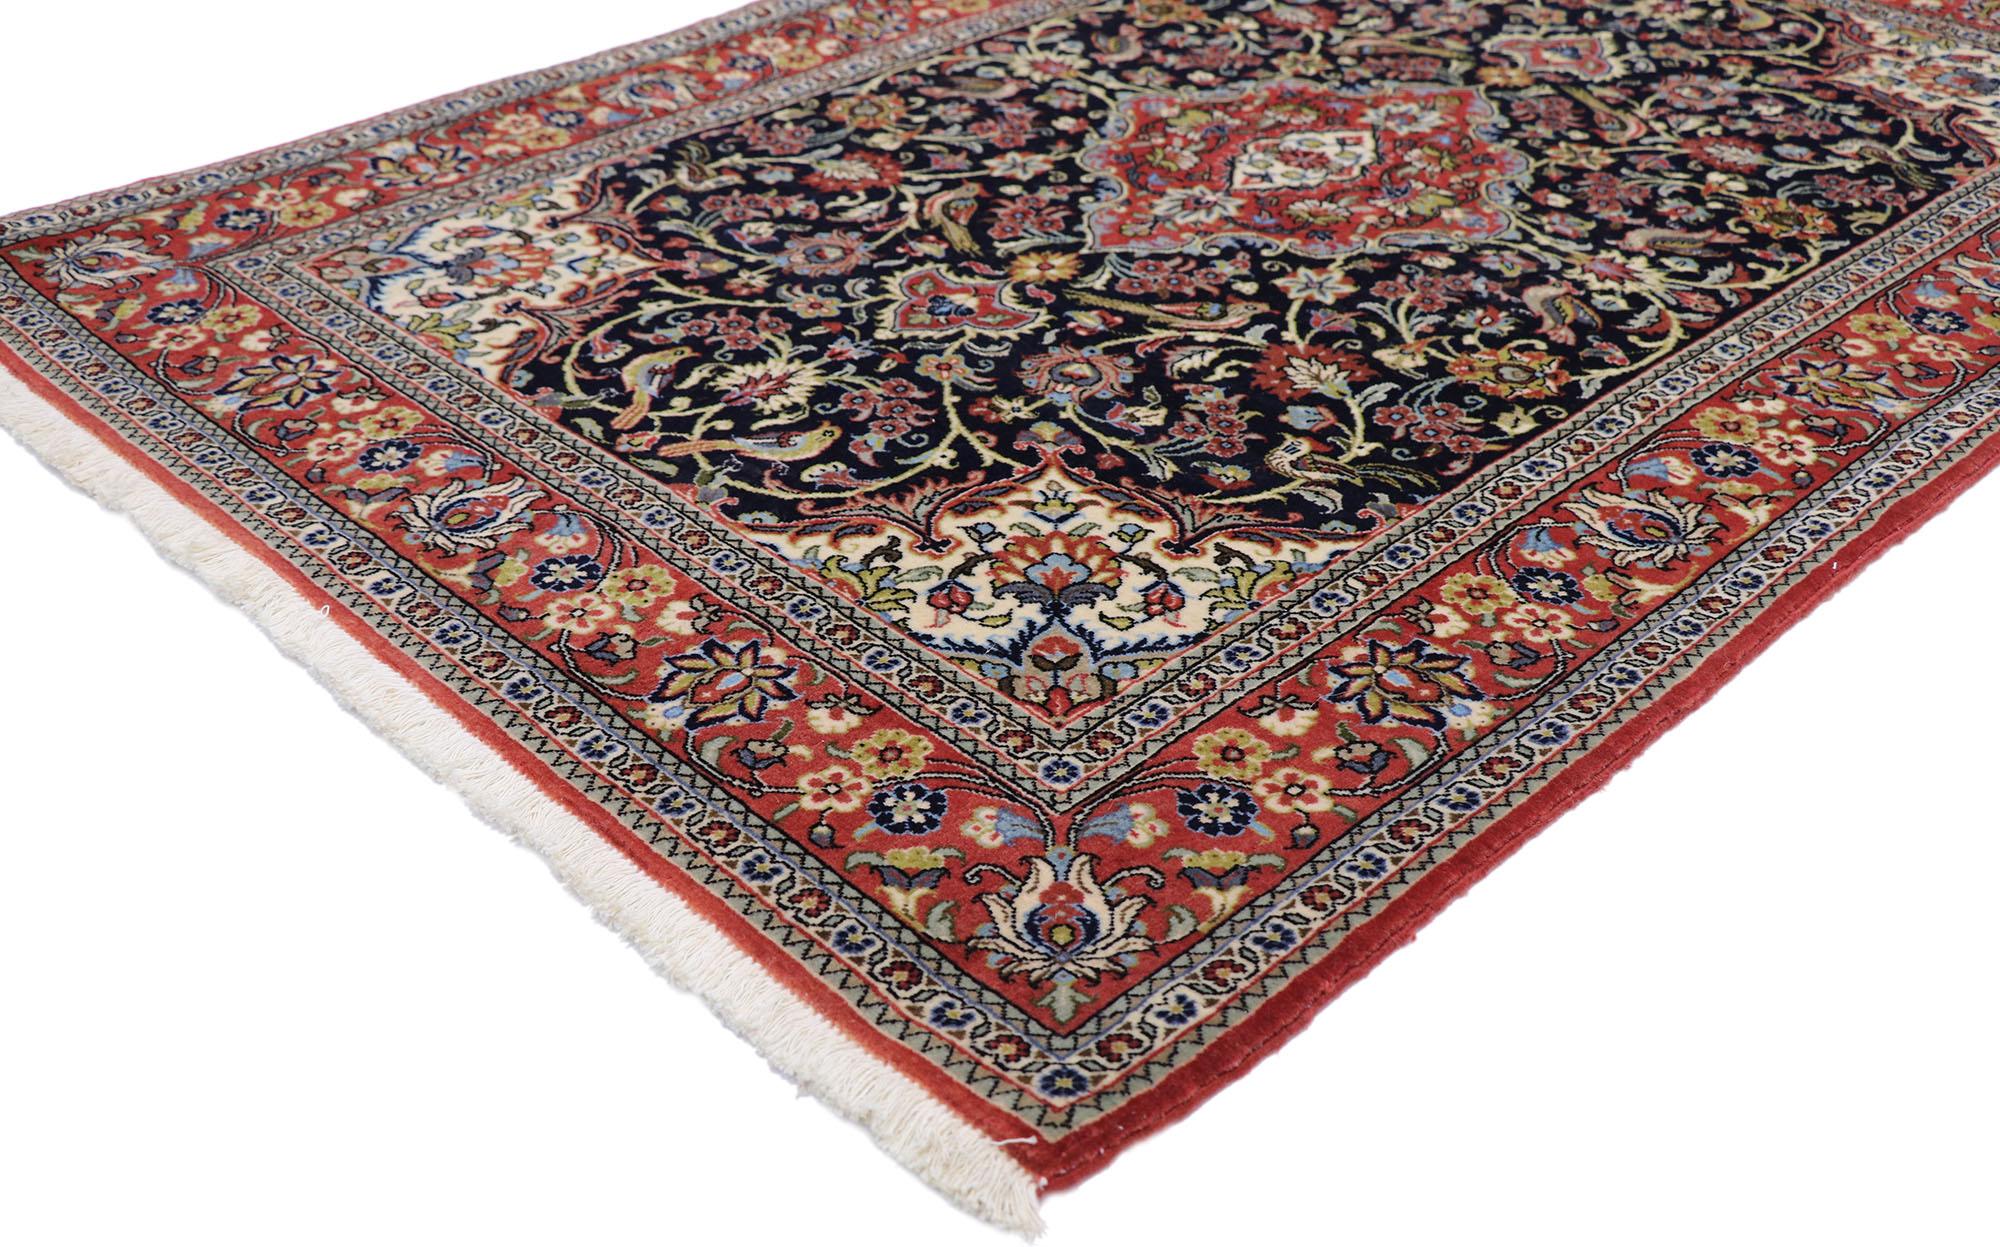 77864, vintage Persian Qum rug with Neoclassical Art Nouveau style. With ornate details and well-balanced symmetry combined with a regal color palette, this hand-knotted wool vintage Persian Qum rug beautifully embodies Neoclassical Art Nouveau